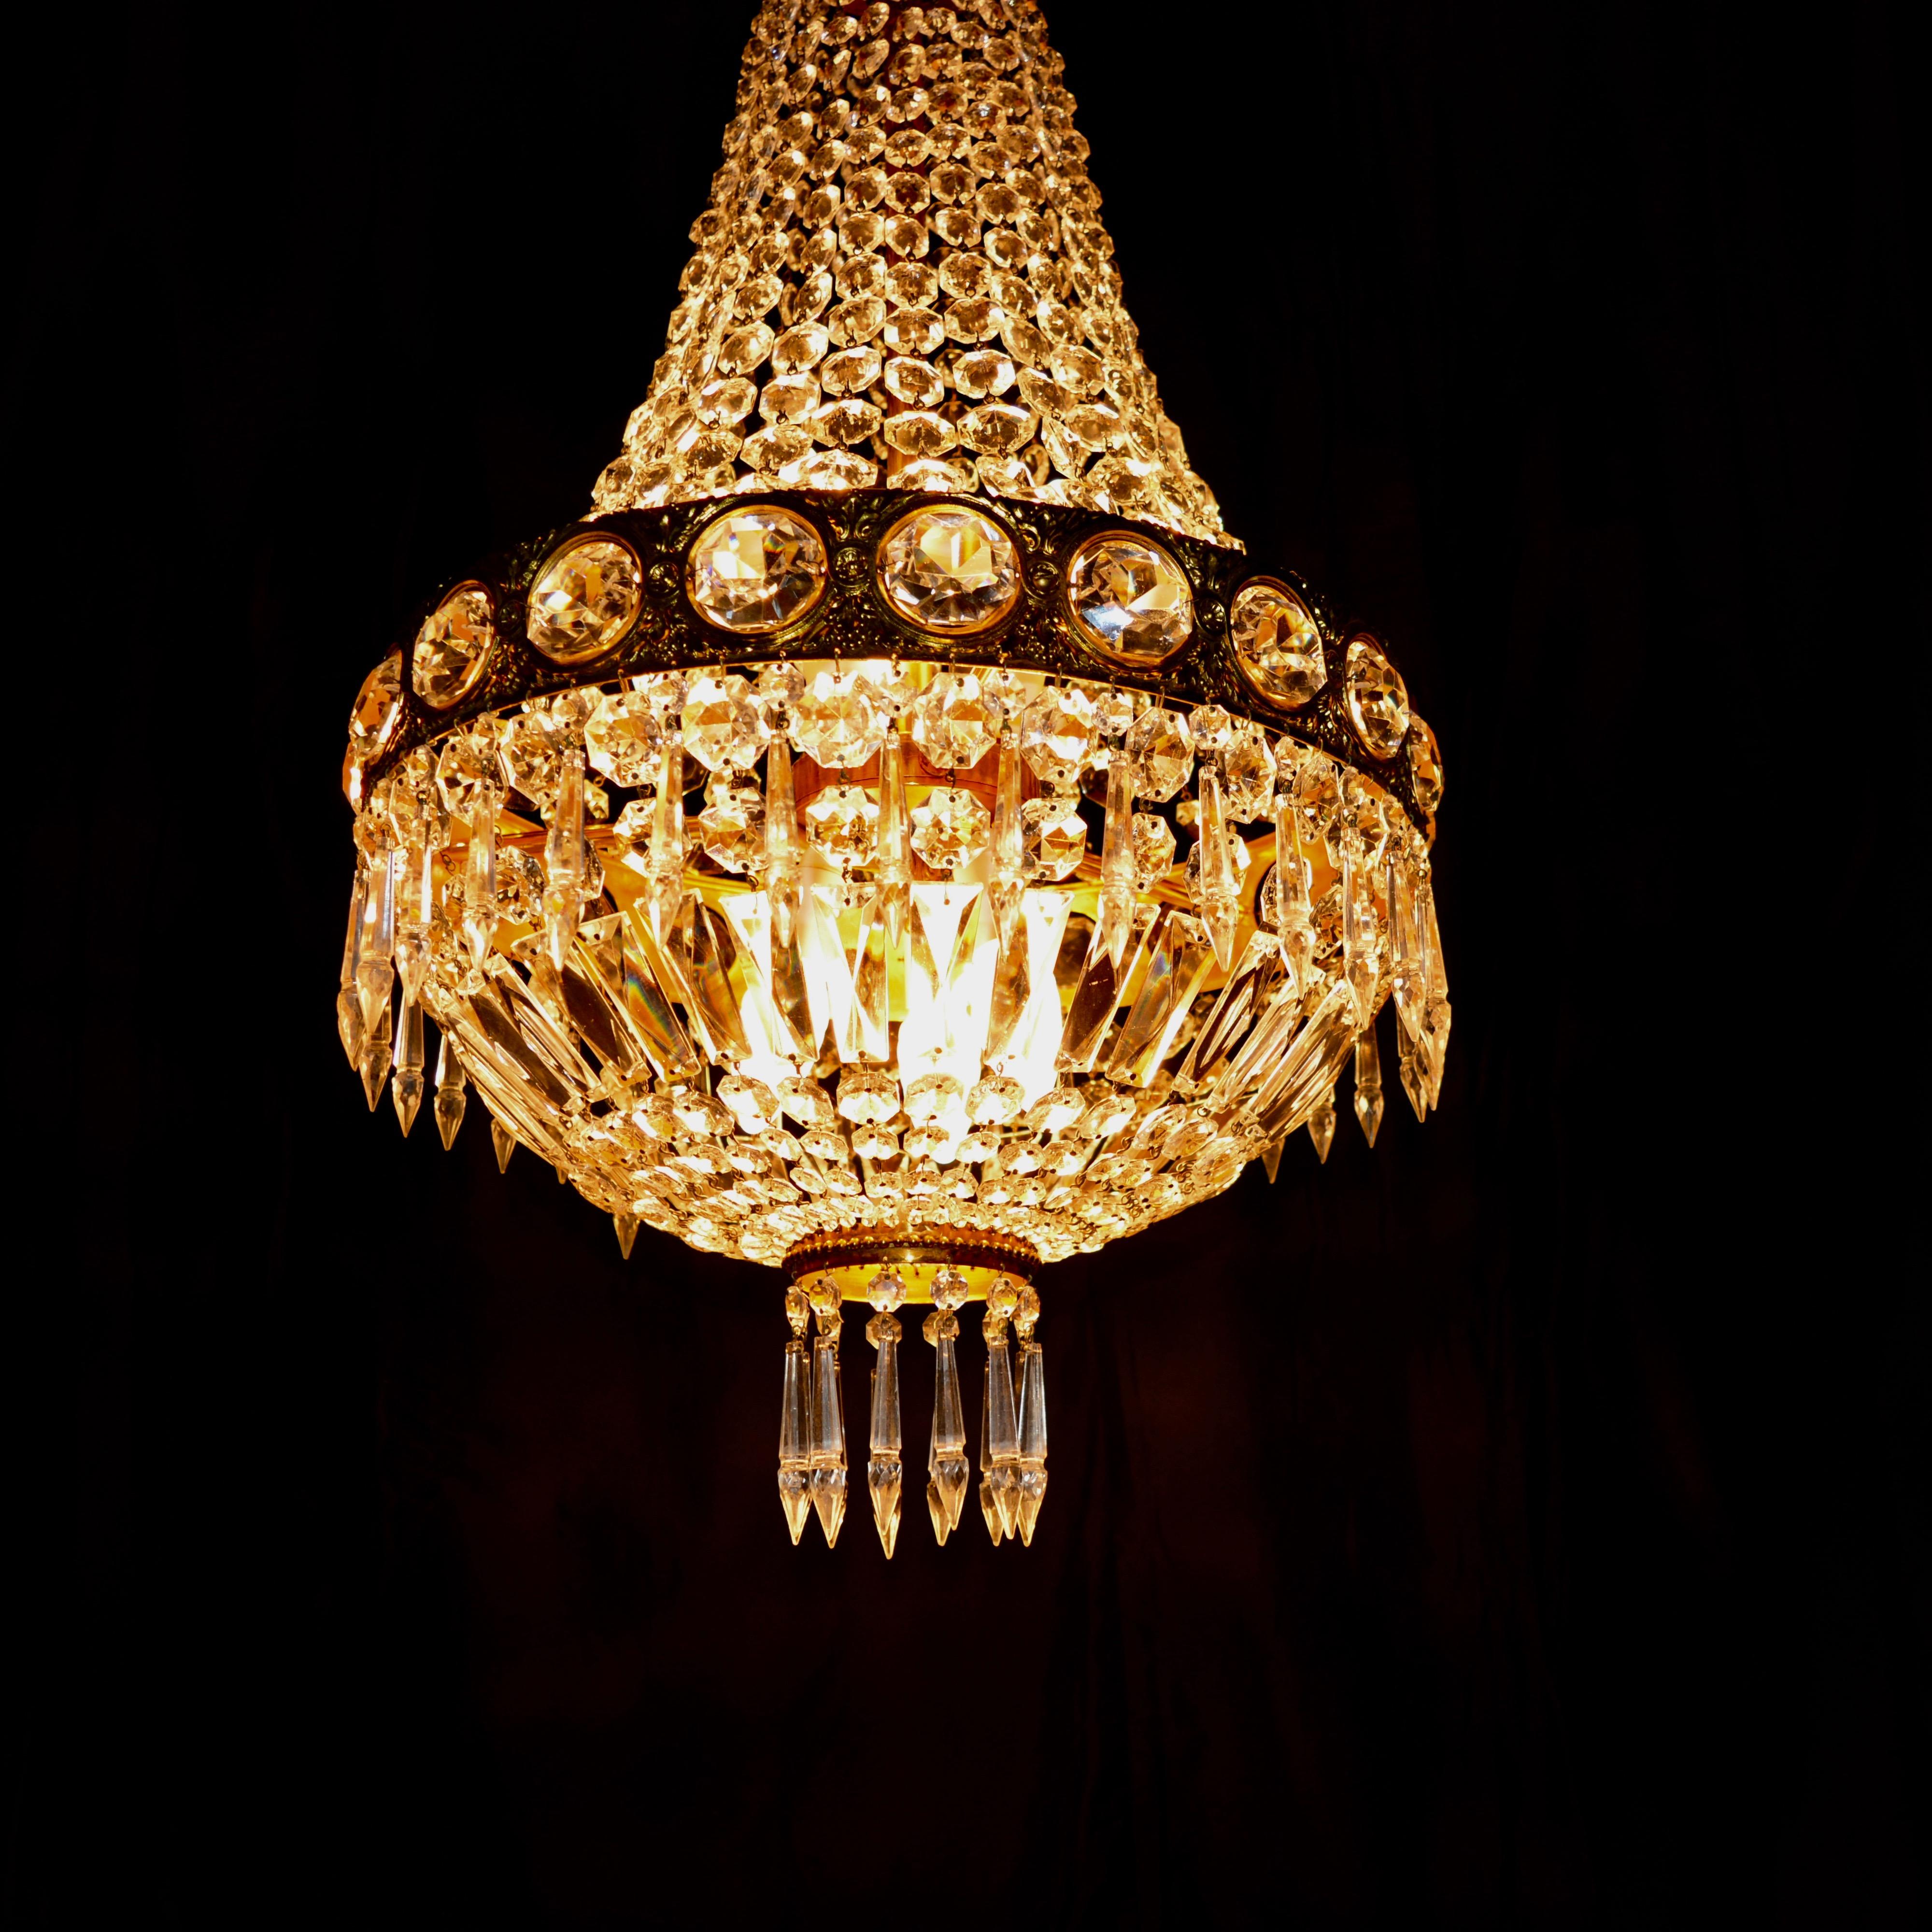 Original preserved chandelier, circa 1940. Cabling and sockets completely renewed. Crystal hand-knotted
Measures: Total height: 130 cm, height without chain: 85 cm, diameter 43 cm, weight (approximately) 7 kg.

Number of lights: Six-light bulb